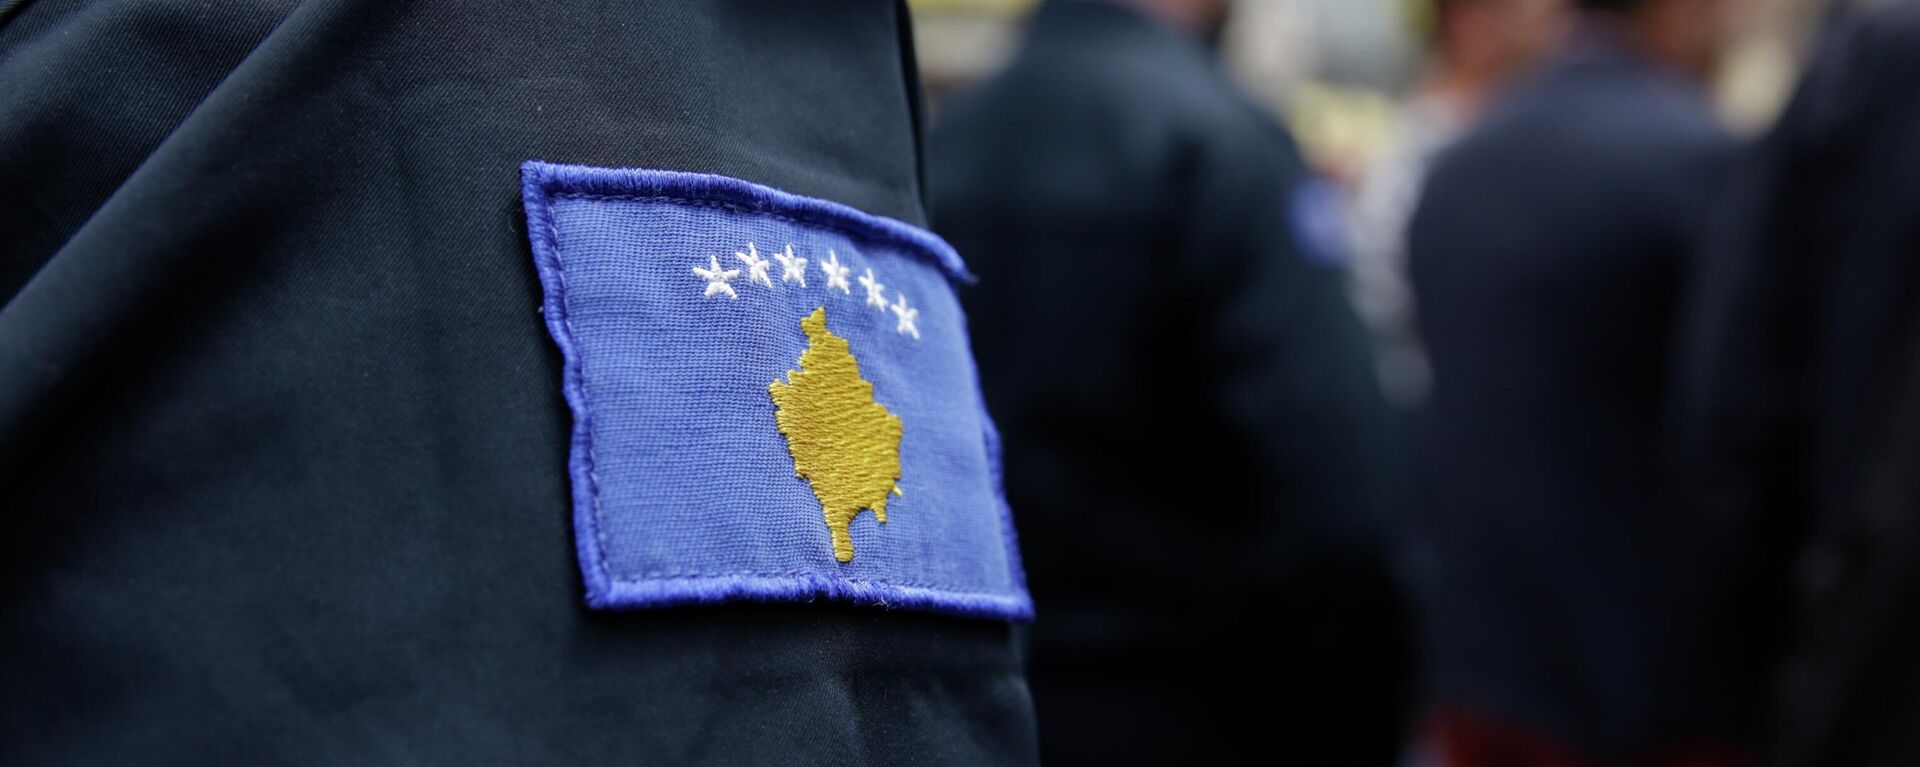 Patch with the coat of arms of the self-proclaimed Republic of Kosovo on the uniform of a police officer. - Sputnik International, 1920, 06.08.2022